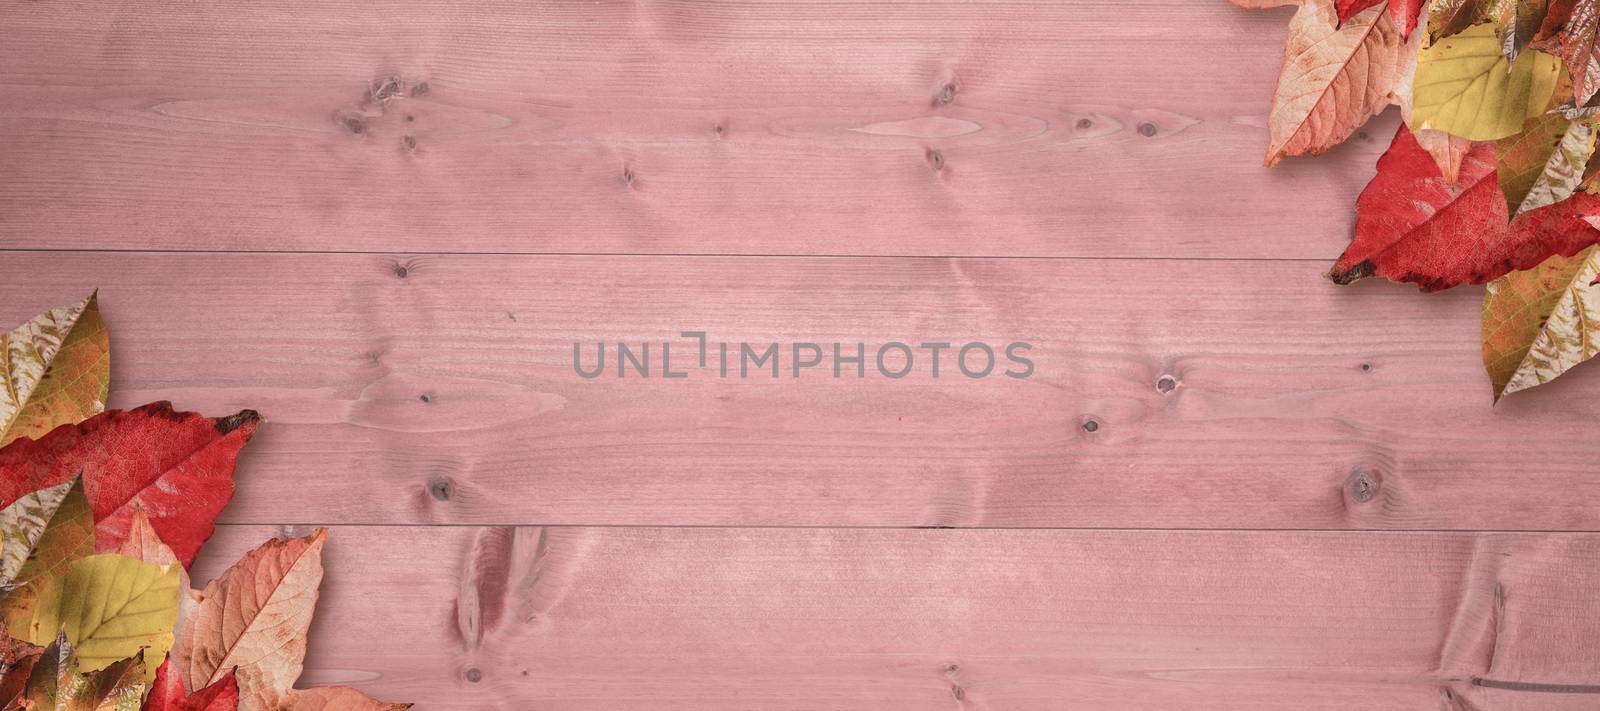 Autumn leaves pattern against bleached wooden planks background